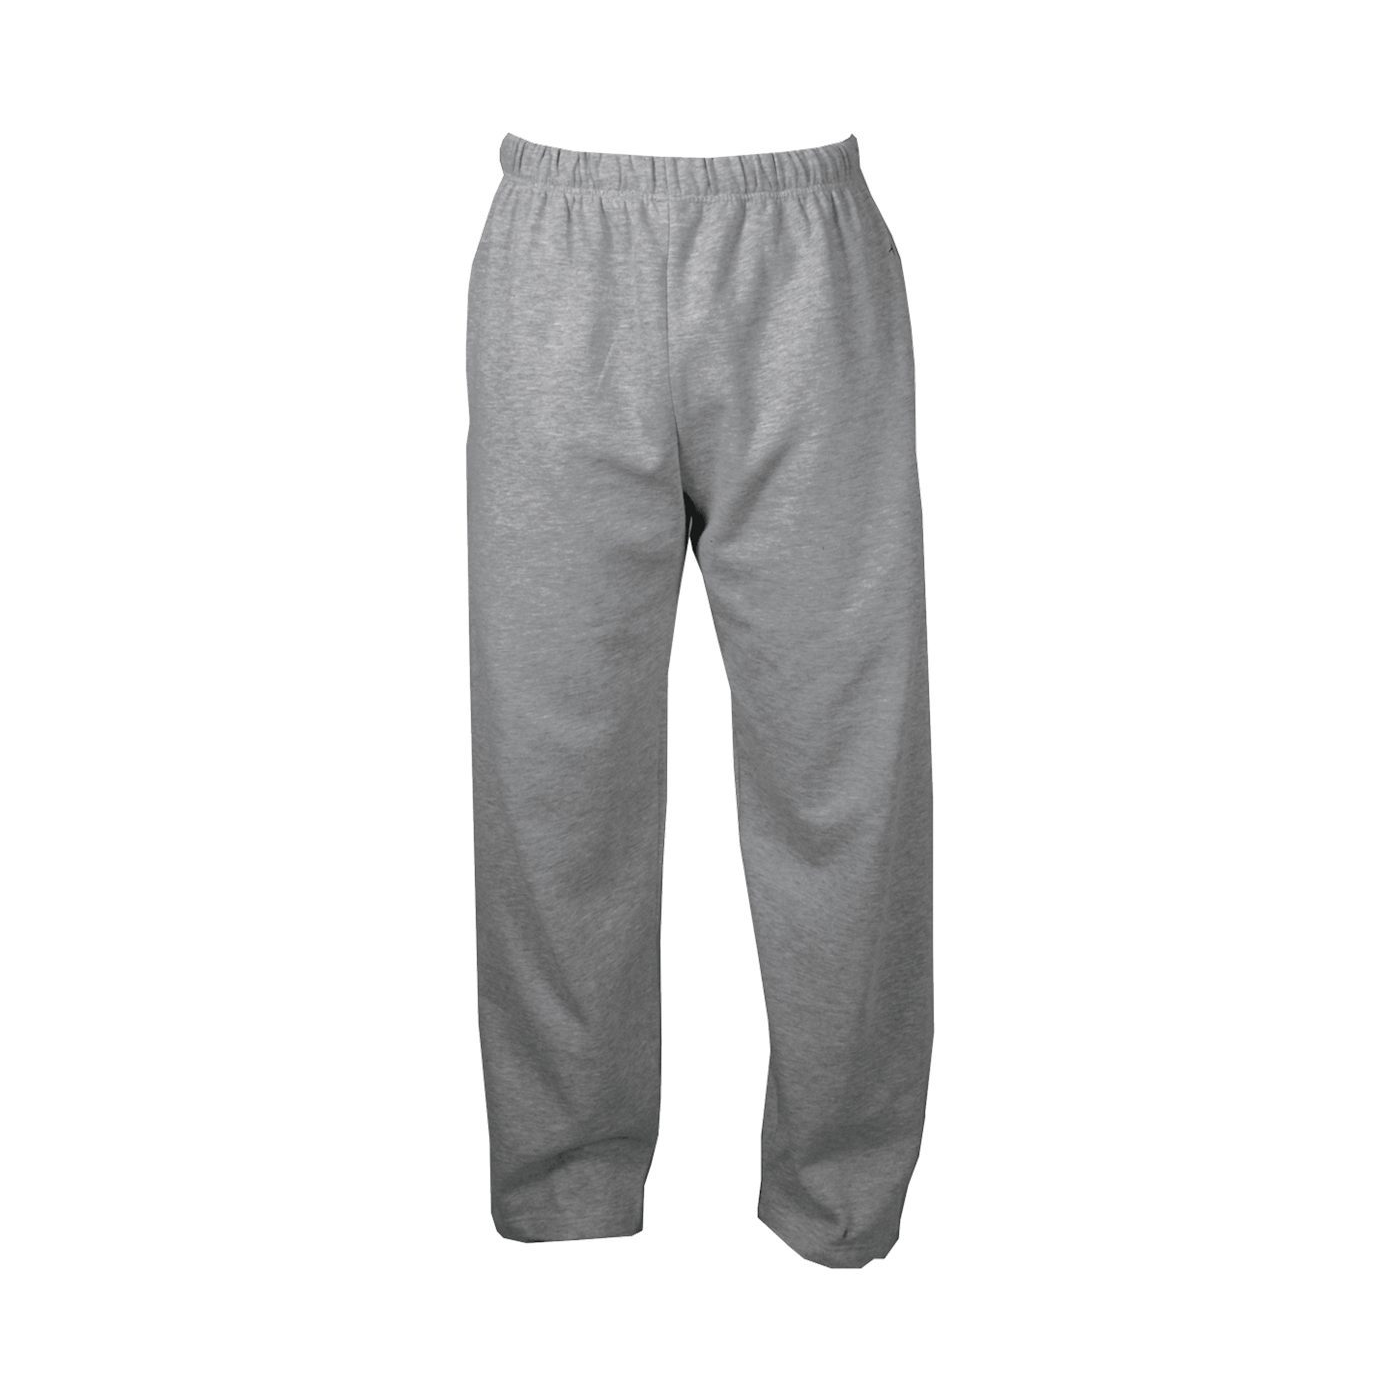 C2 Fleece Youth Pant | Badger Sport - Athletic Apparel